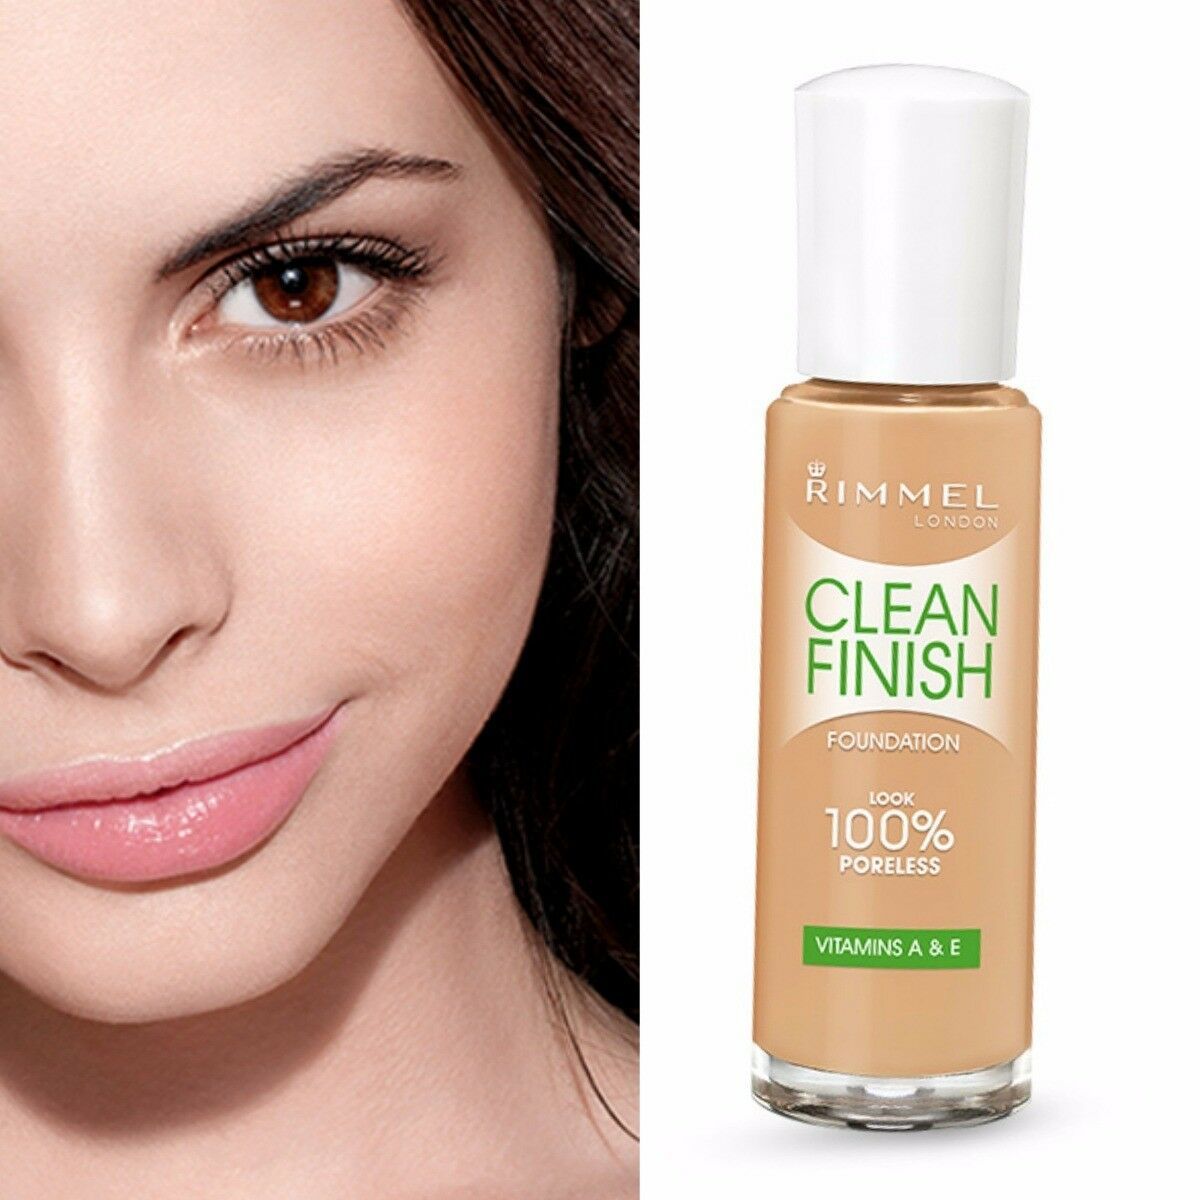 BUY 1 GET 1 AT 20% OFF (Add 2 To Cart) Rimmel Clean Finish Foundation (CHOOSE) - $7.67 - $18.47